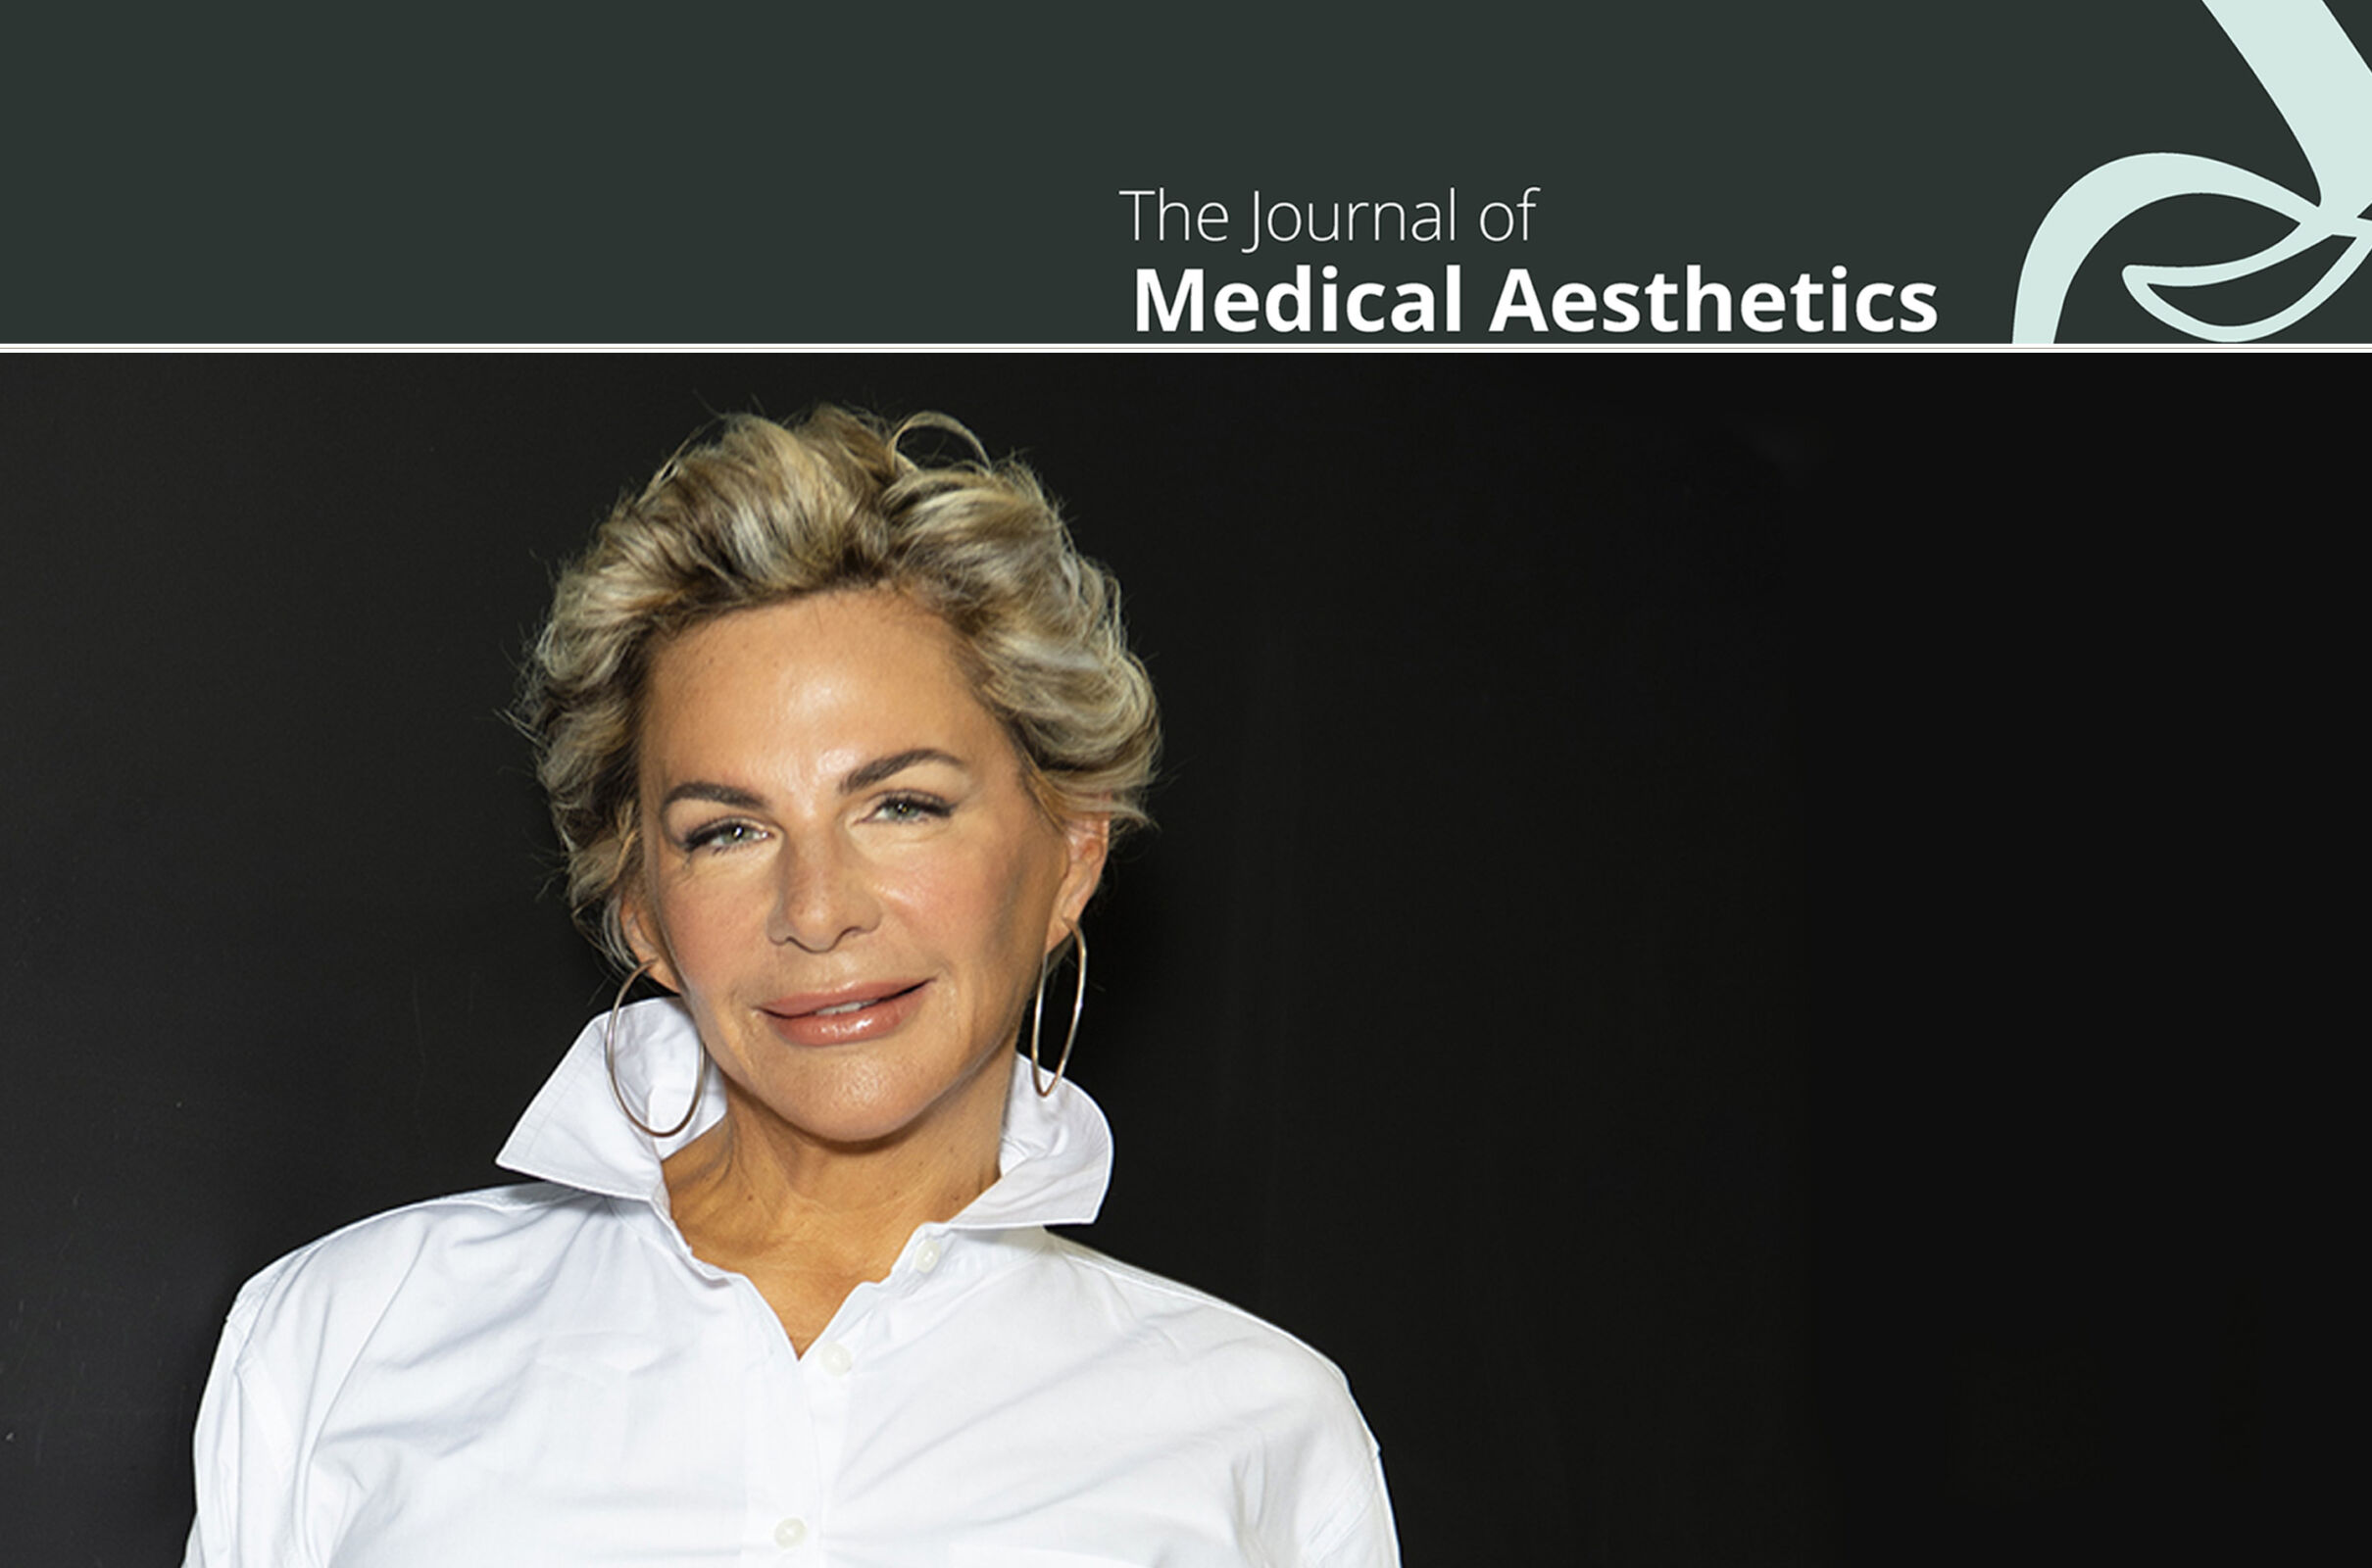 Erin White, VP Sales Performance, EMEA at Hydrafacial Feature Article main image